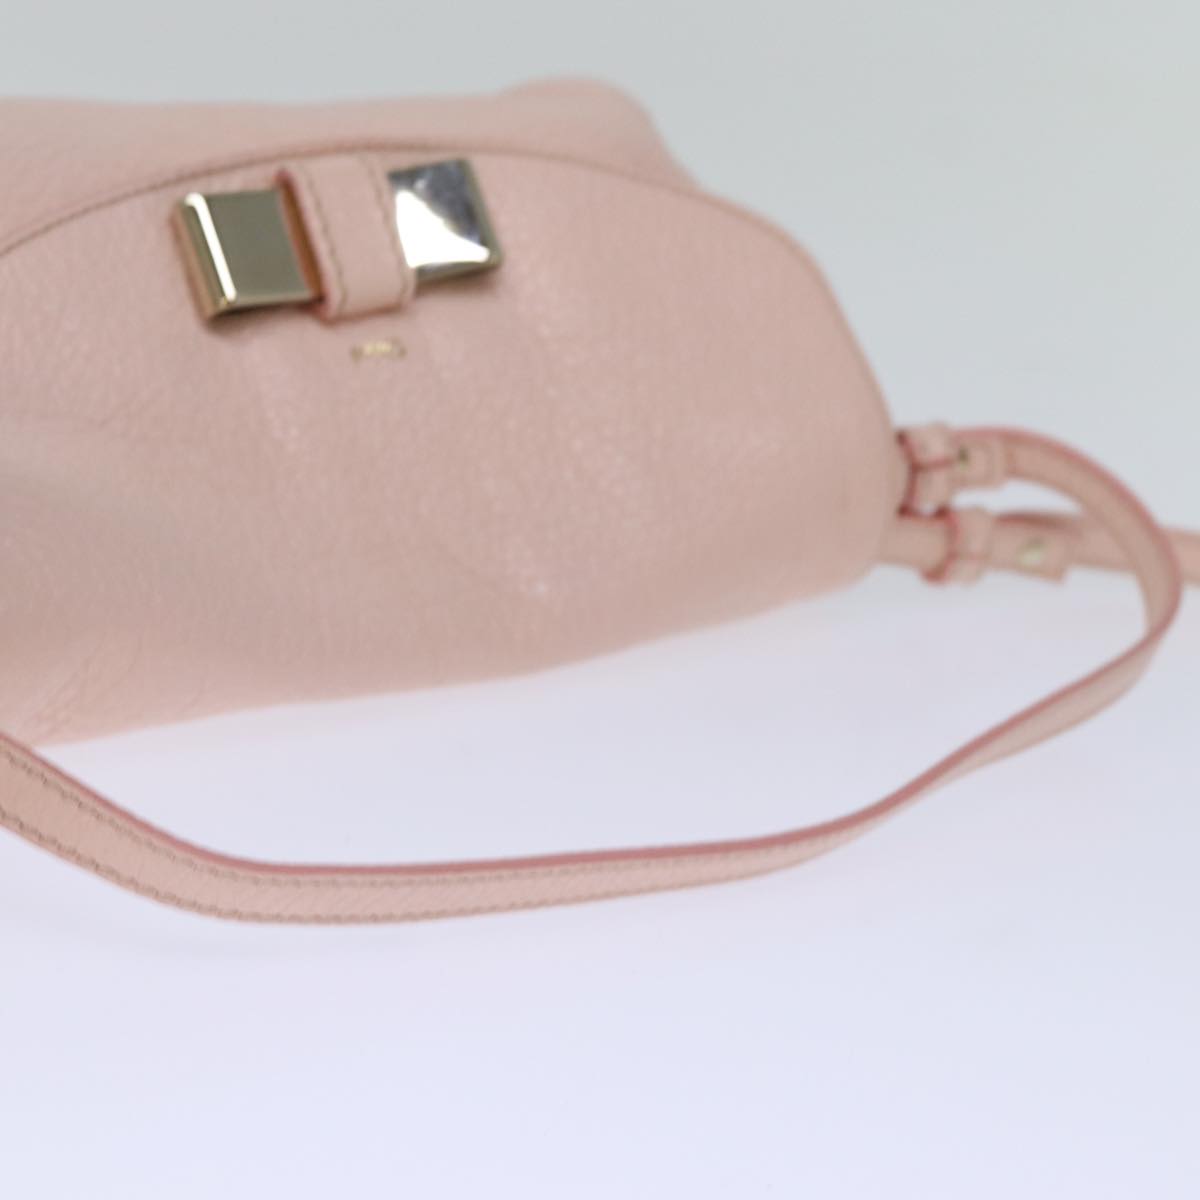 Chloe Lily Hand Bag Leather 2way Pink Auth yk12570